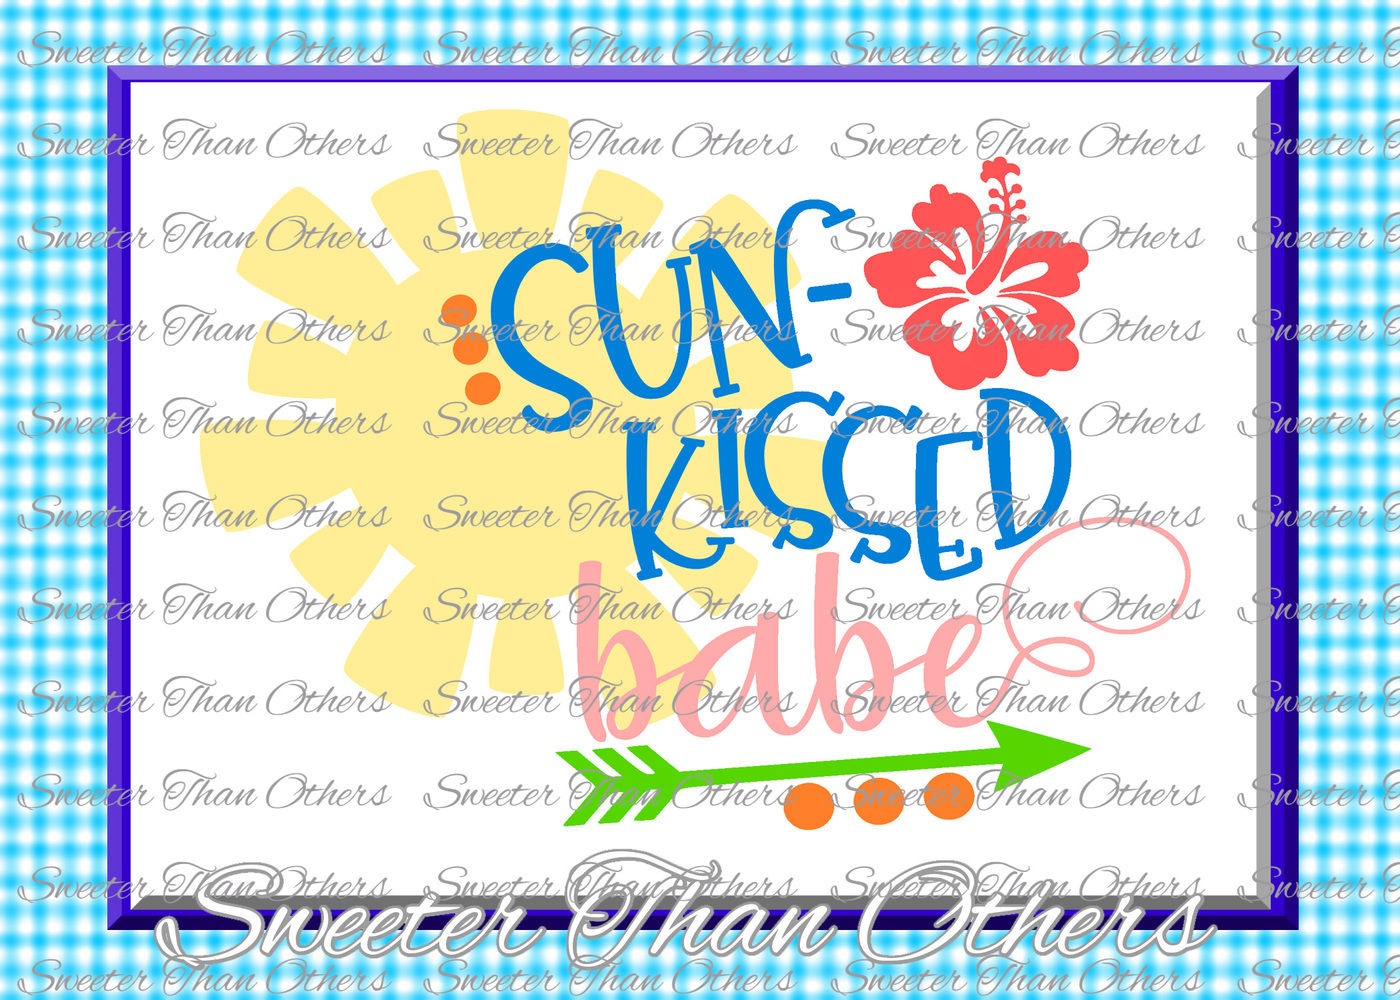 Download Beach Svg Sun Kissed Babe Svg Summer Beach Pattern Dxf Silhouette Cameo Cut File Cricut Cut File Instant Download Vinyl Design By Sweeter Than Others Thehungryjpeg Com